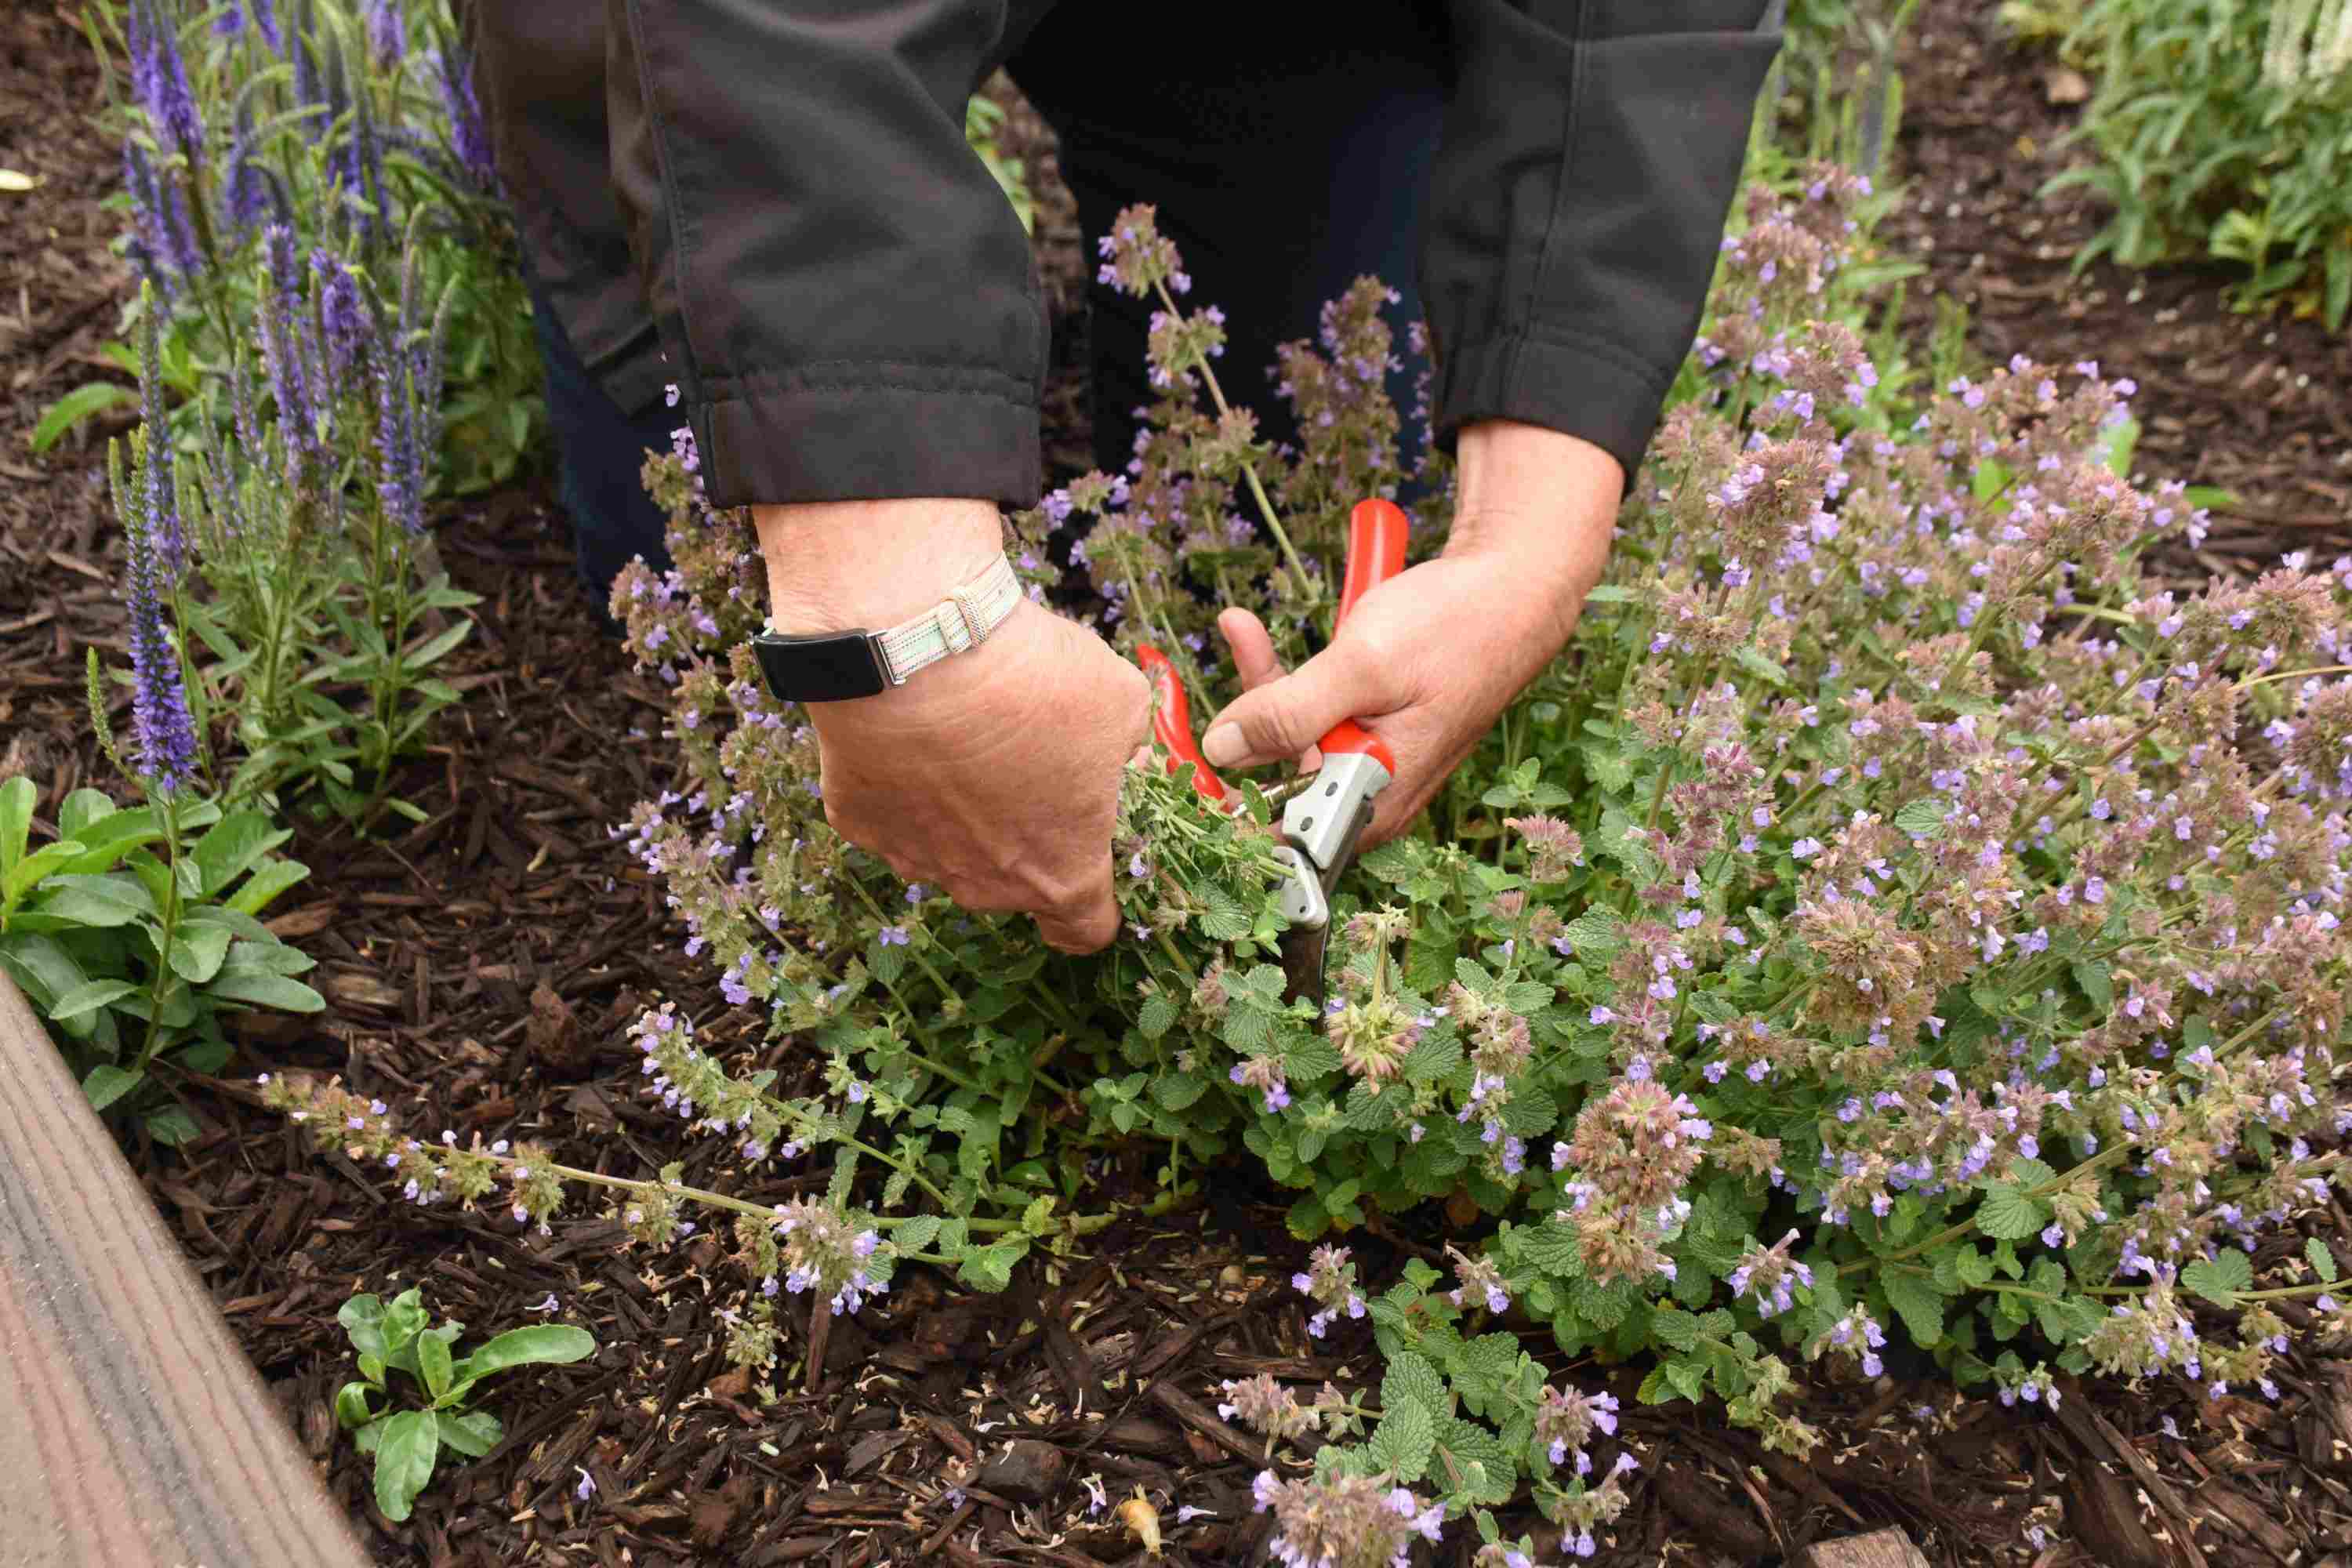 How To Take Care Of Perennials